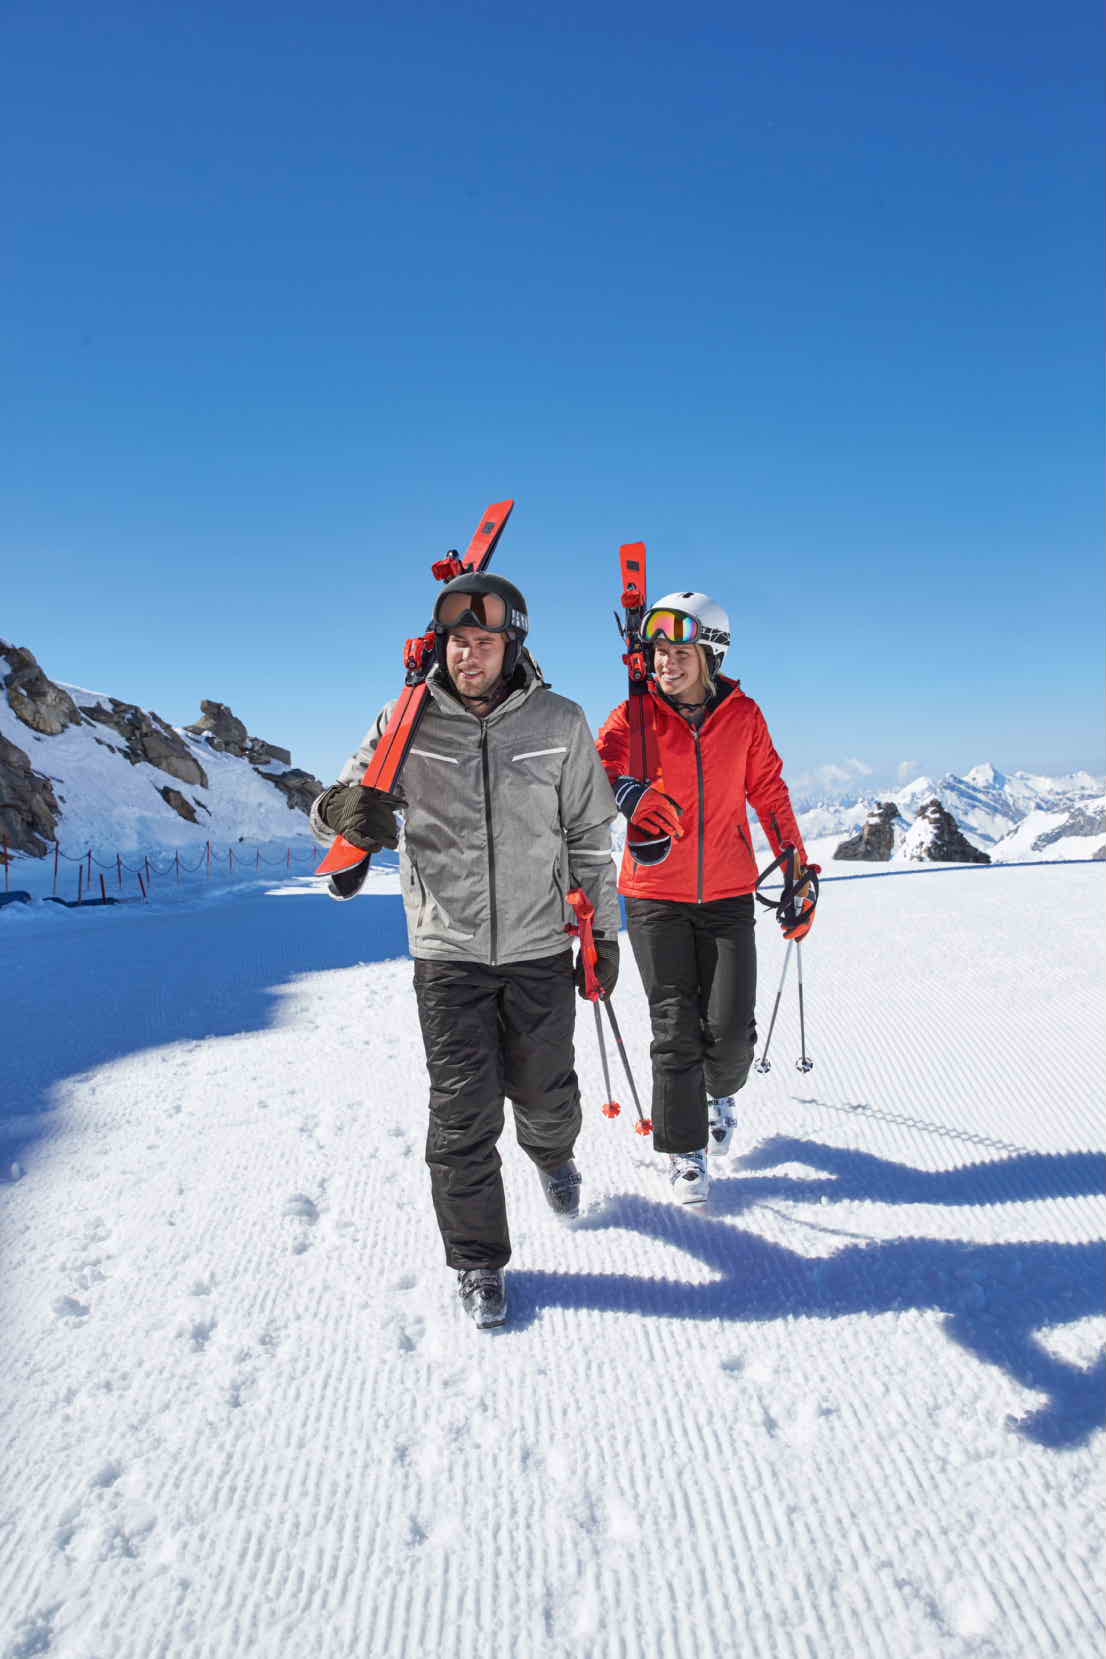 Get Suited And Booted This Ski Season With Lidl